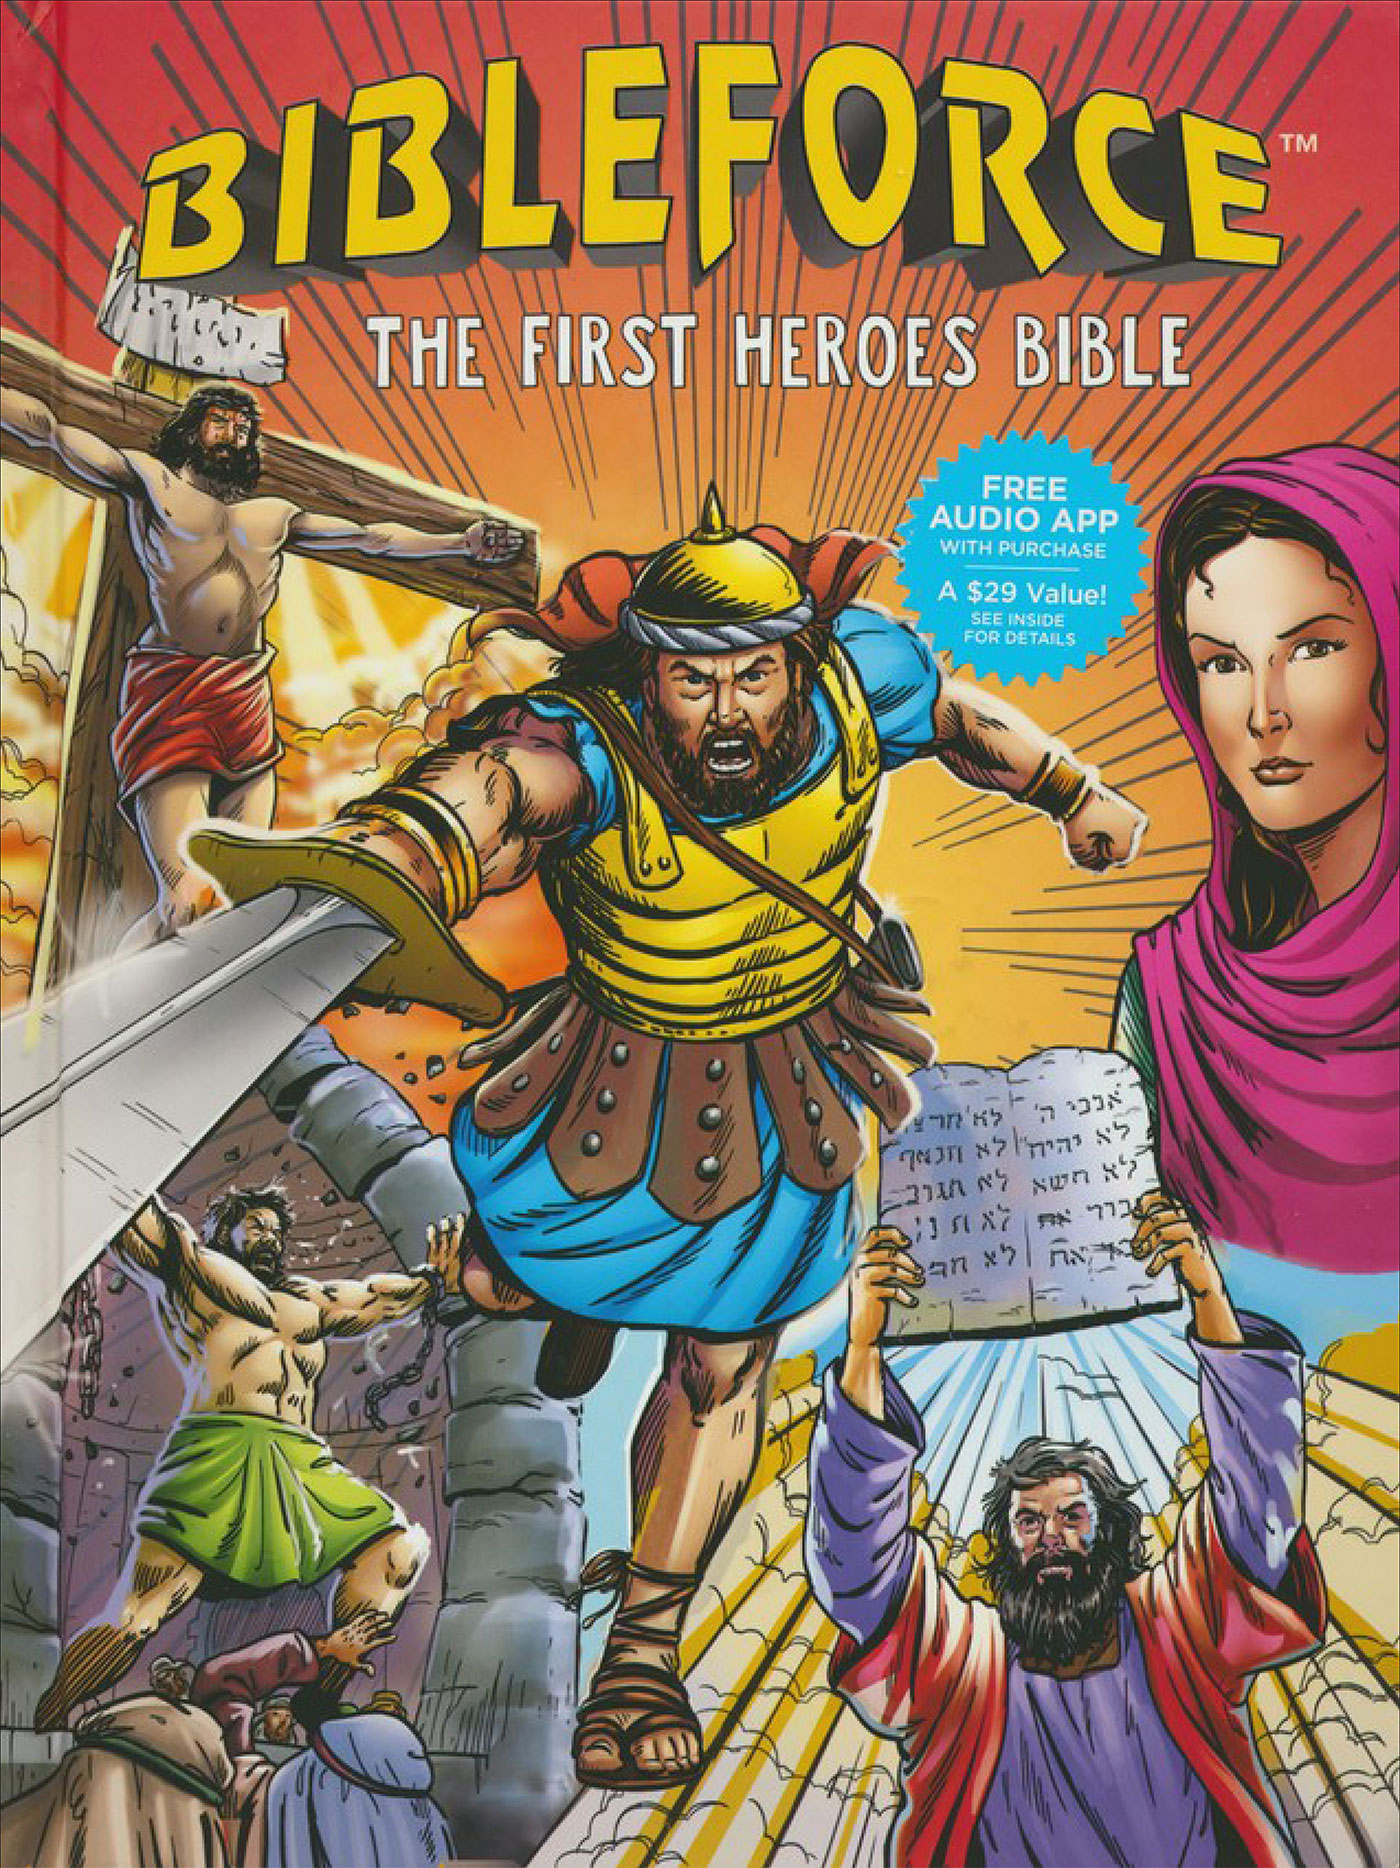 Book cover of several superheroes from Bibleforce, The First Hero's Bible